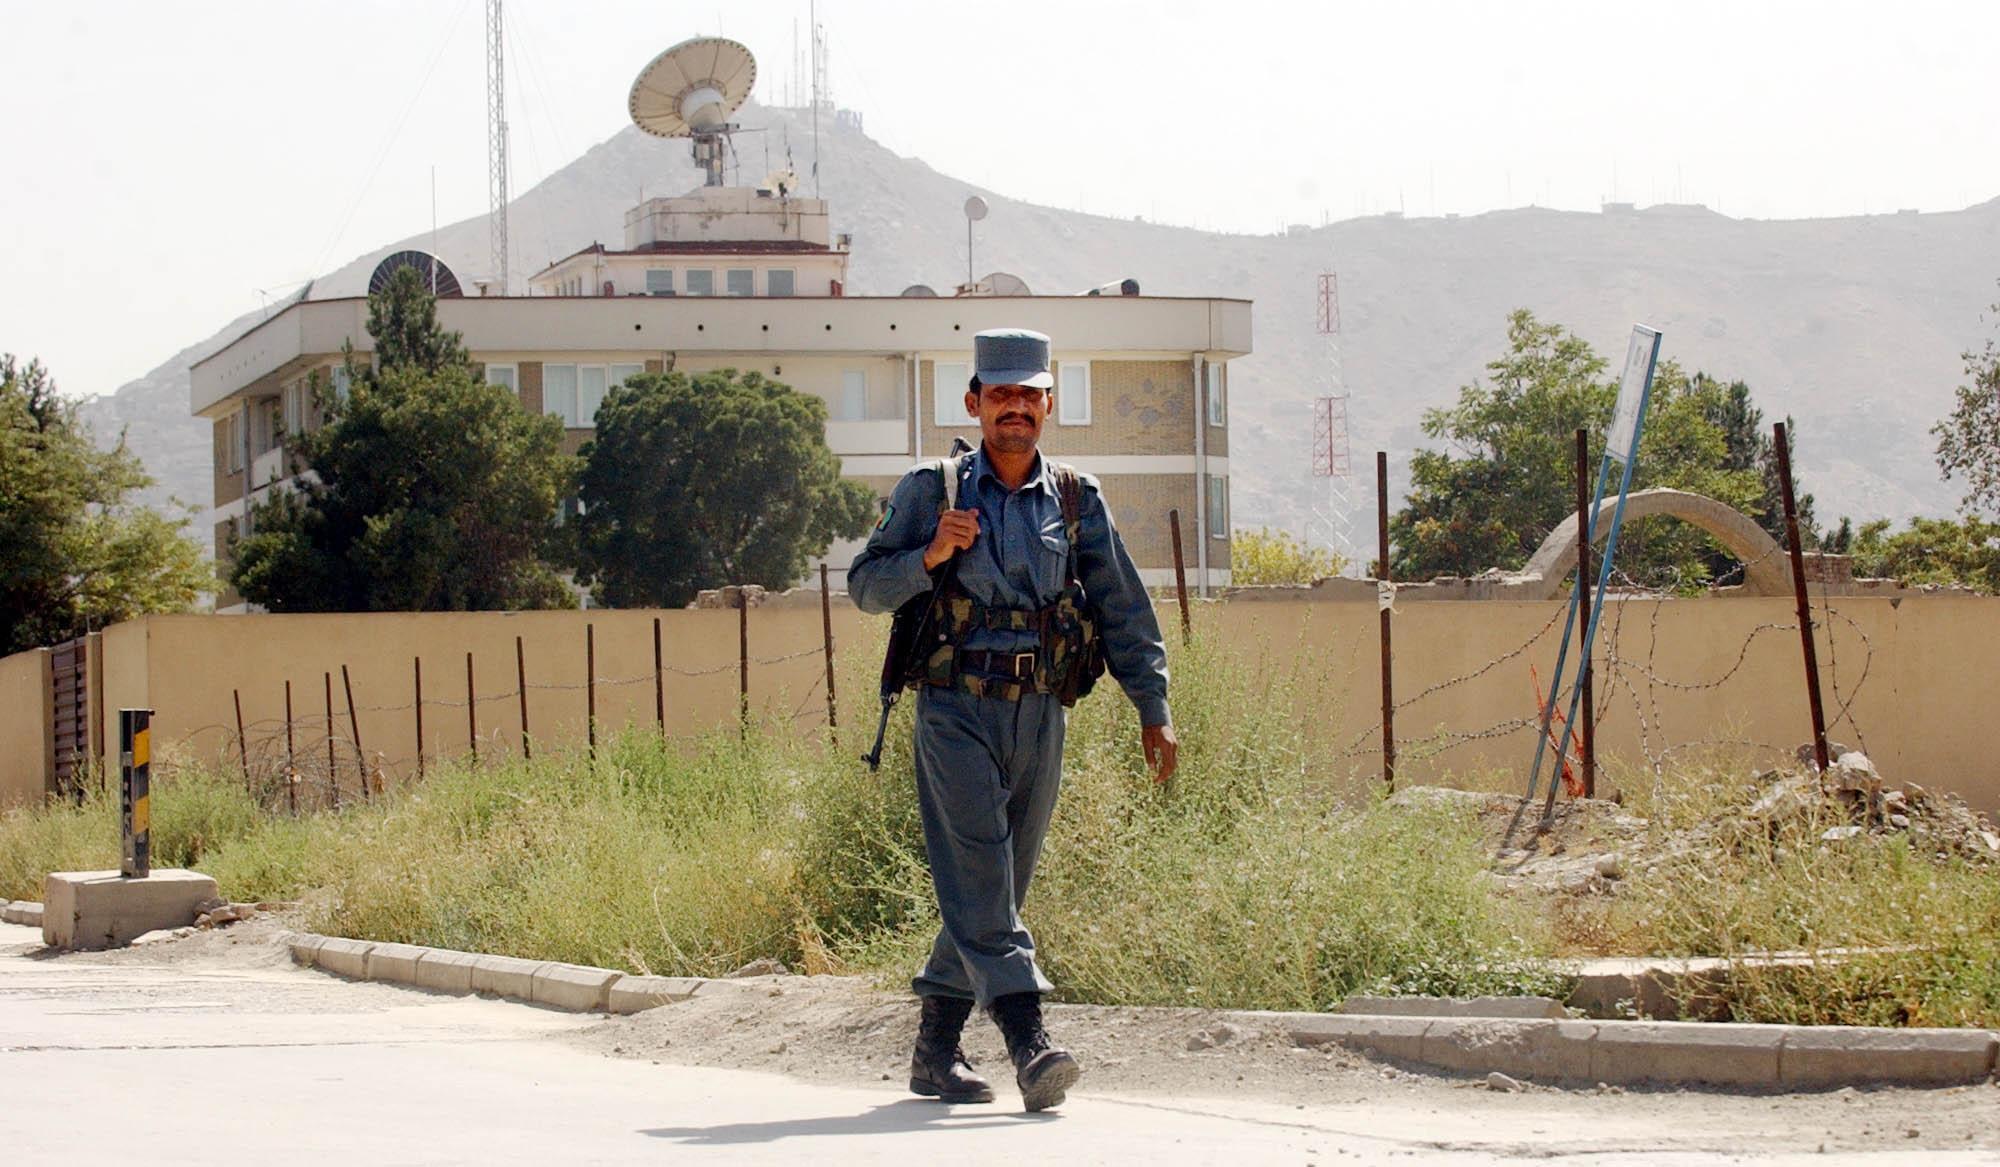 Figures show number of people who worked at British embassy in Afghanistan who remain in country